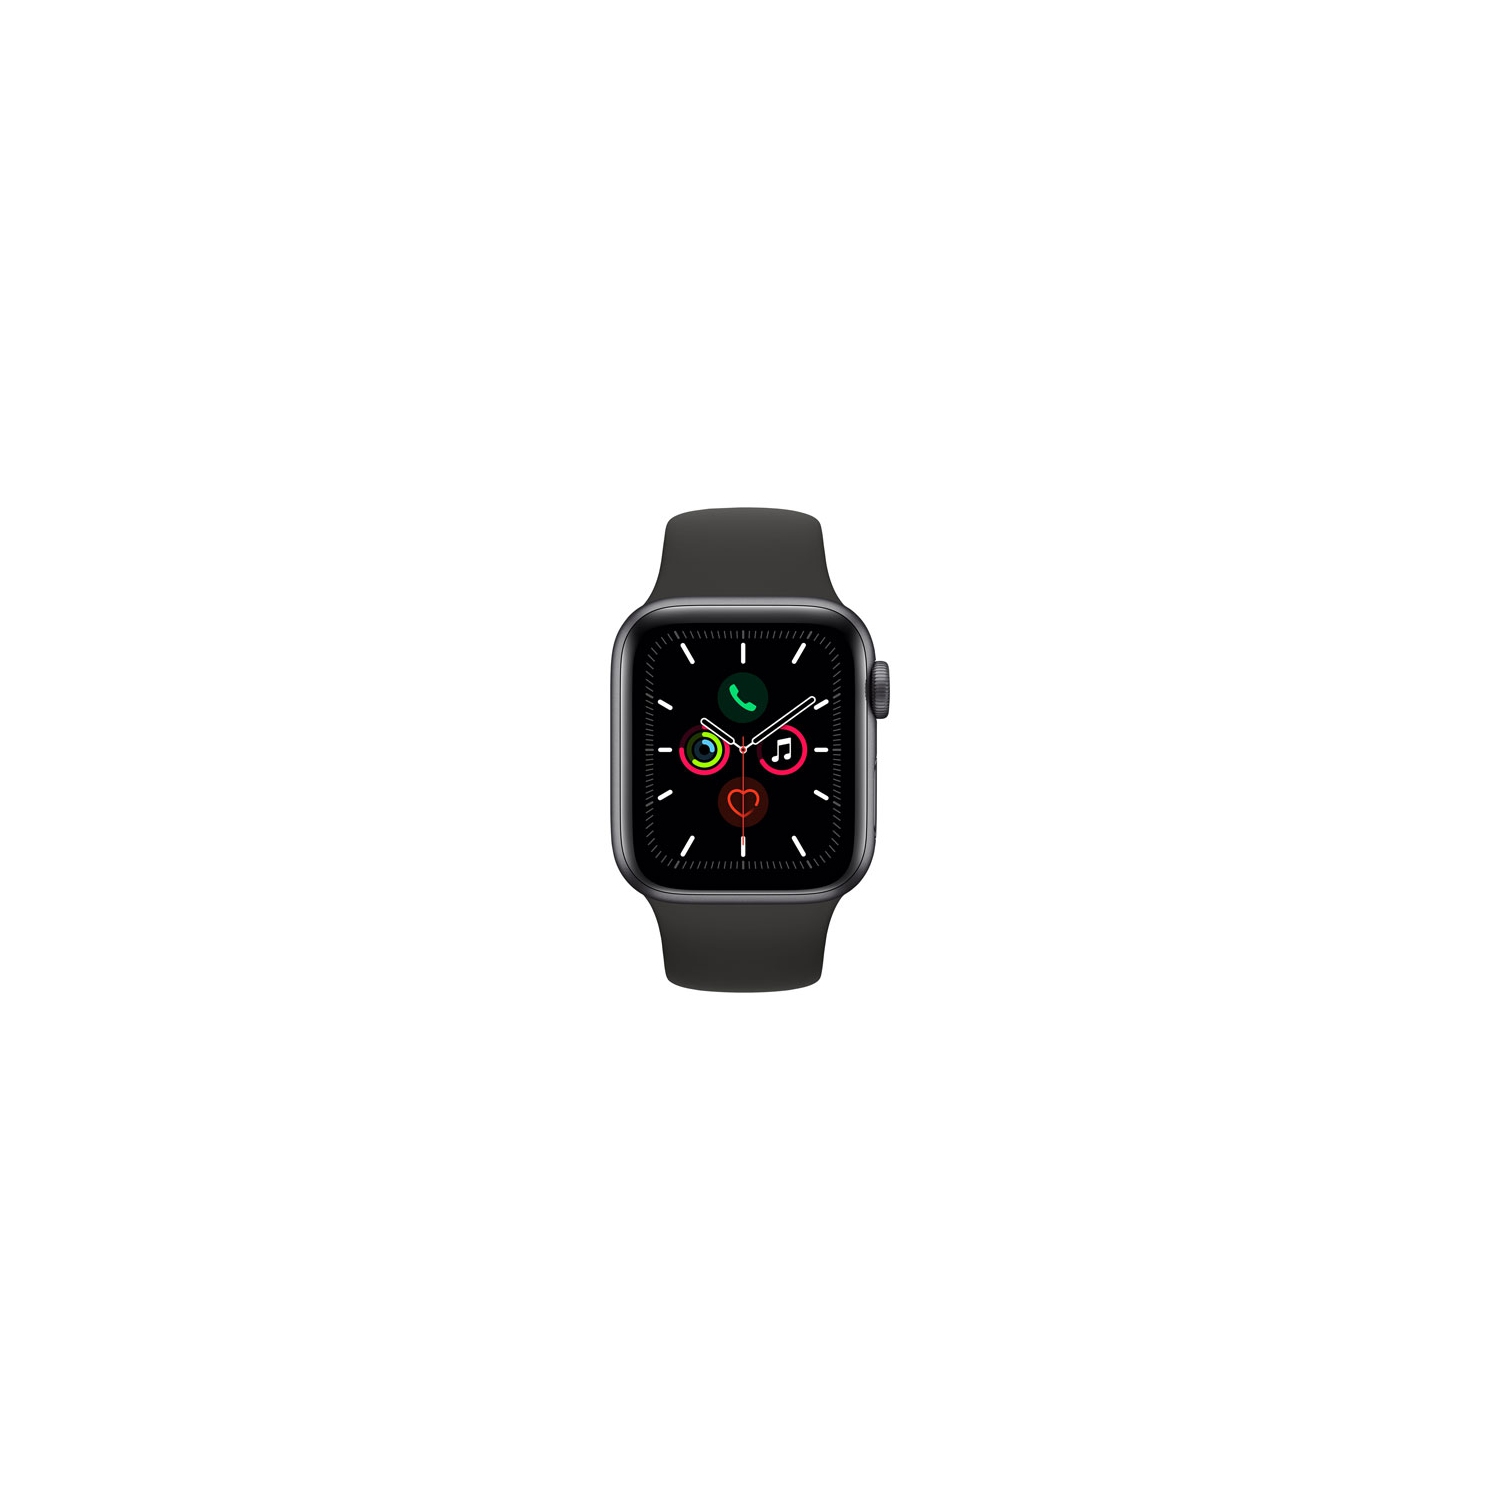 Refurbished (Good) - Apple Watch Series 5 (GPS) 44mm Space Grey Aluminium Case with Black Sport Band - [Refurbished]